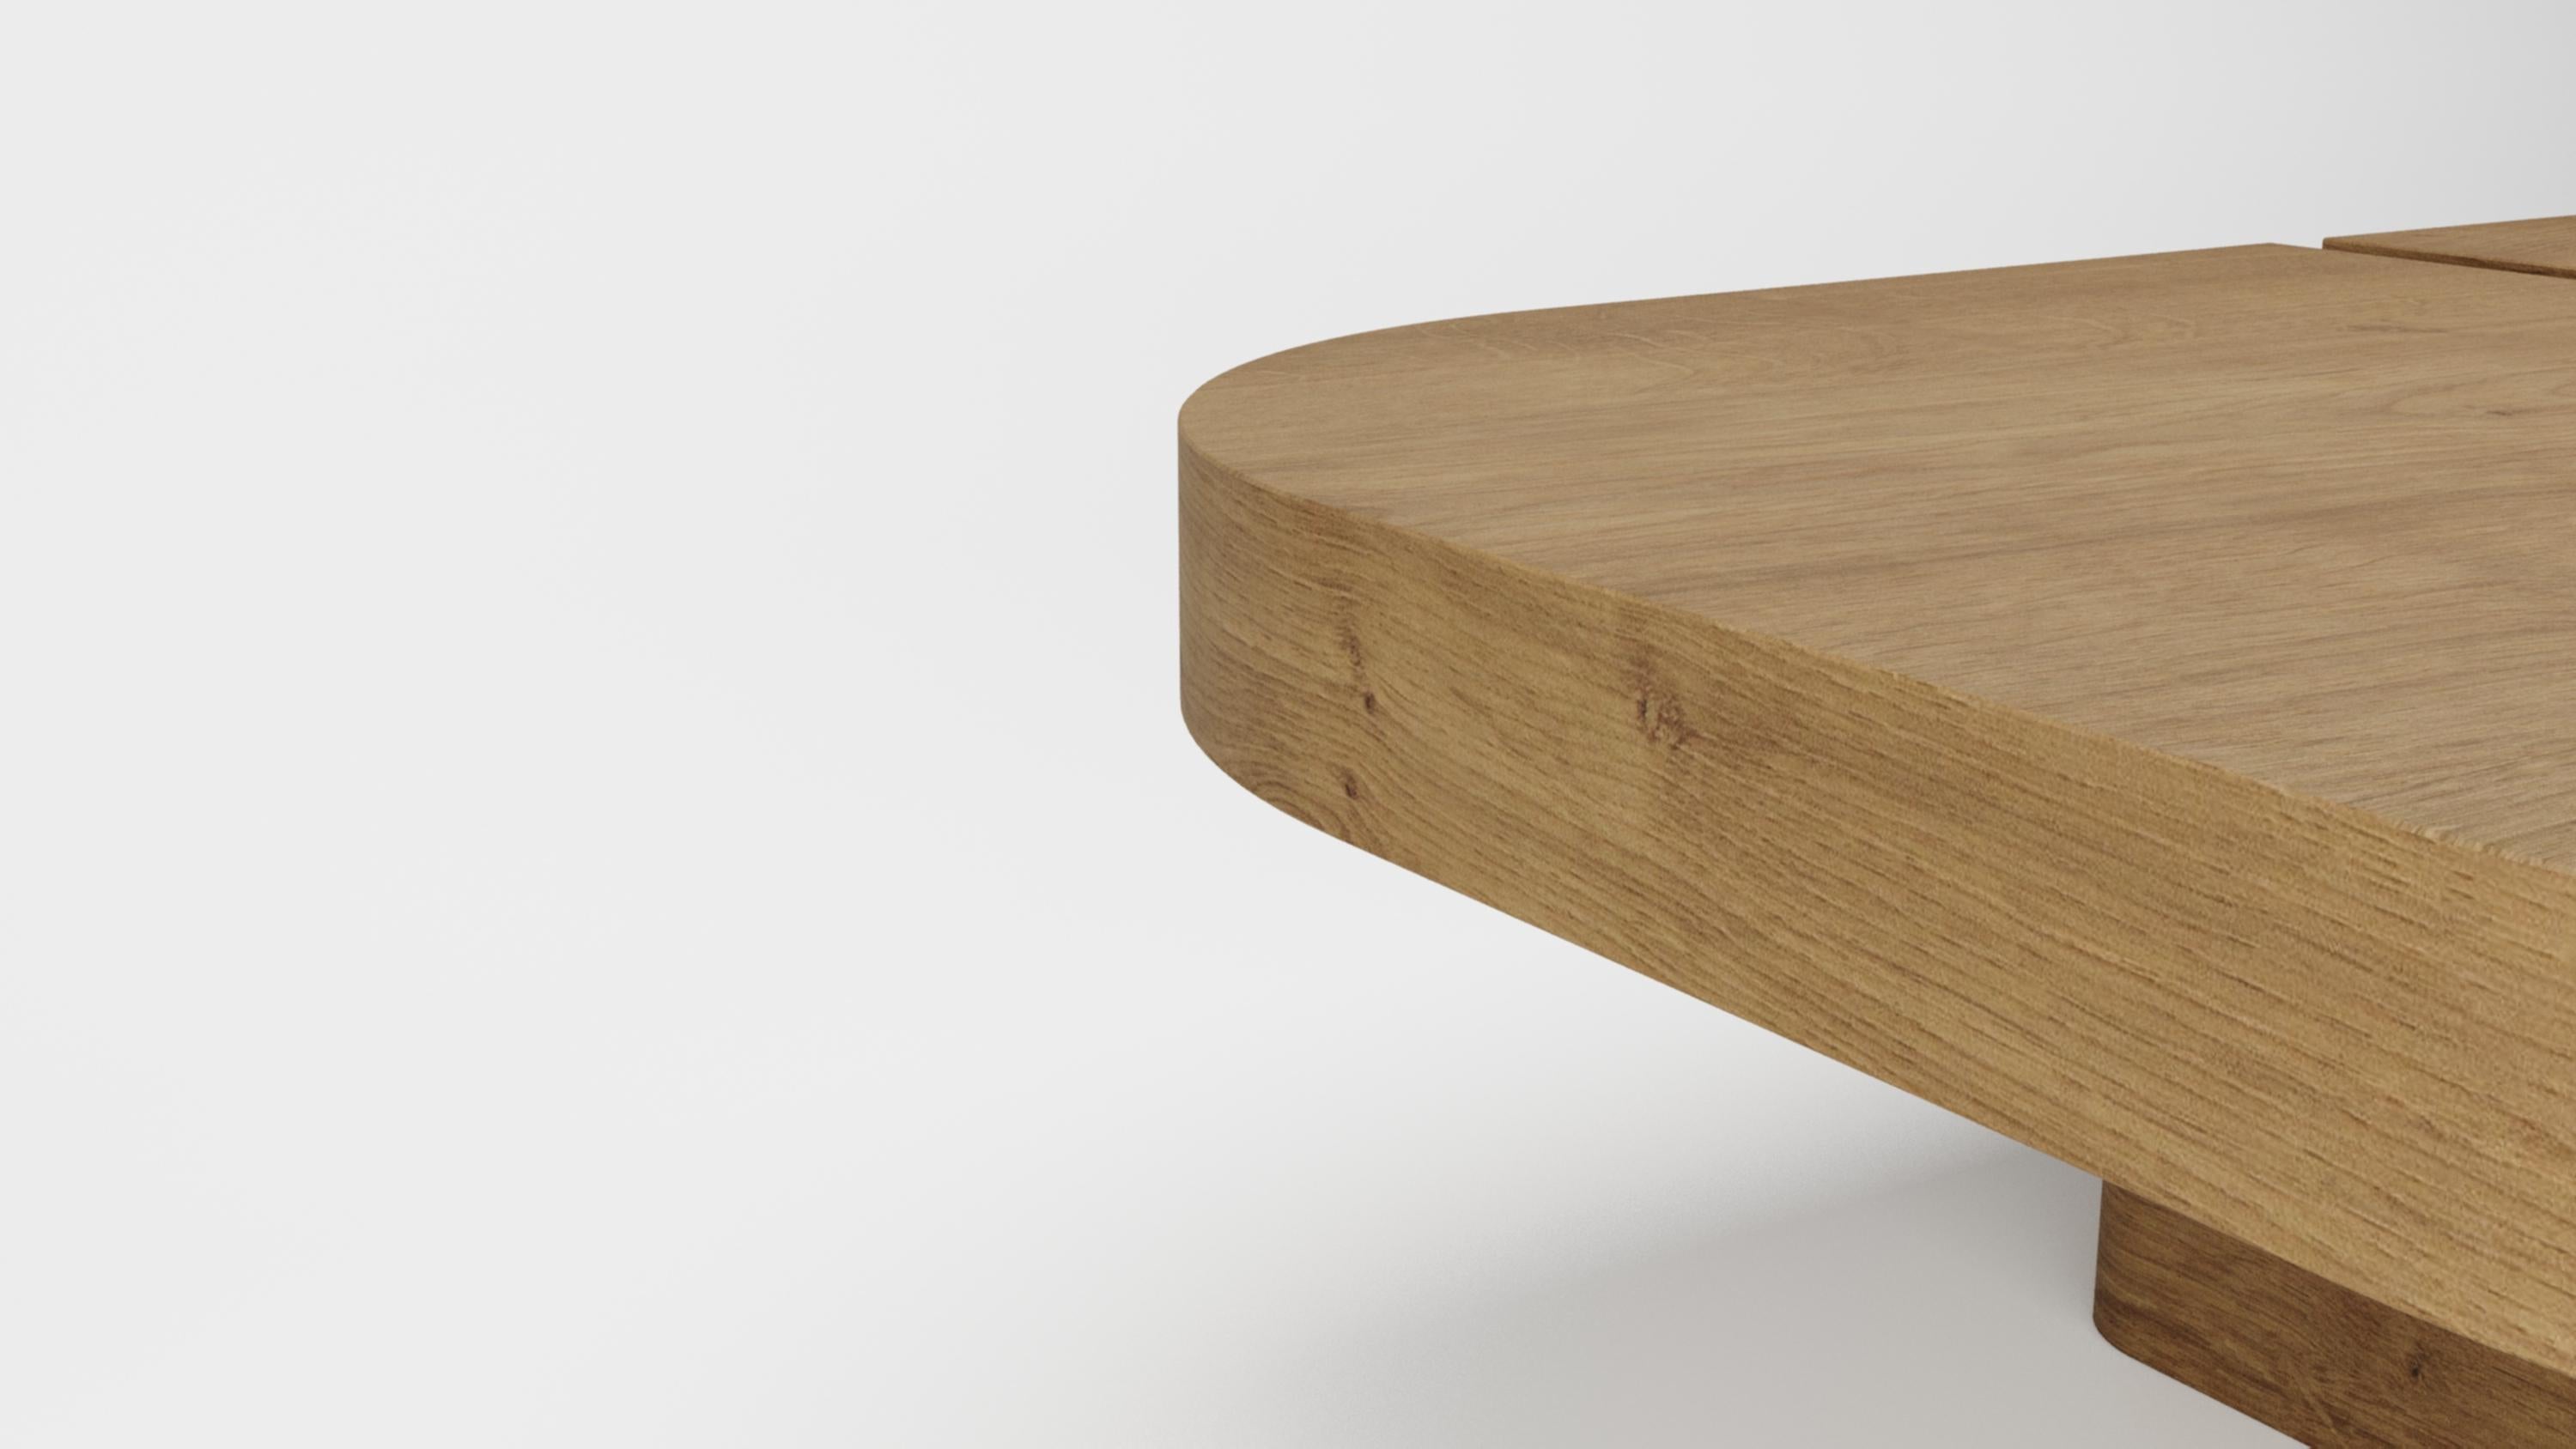 Collector - Designed by Studio Rig MecoCenter Table Smoke Oak

Collector brand was born and Portugal and aims to be part of daily life by fusing furniture to home routines and lifestyles. The company designs its pieces with the intention to embrace